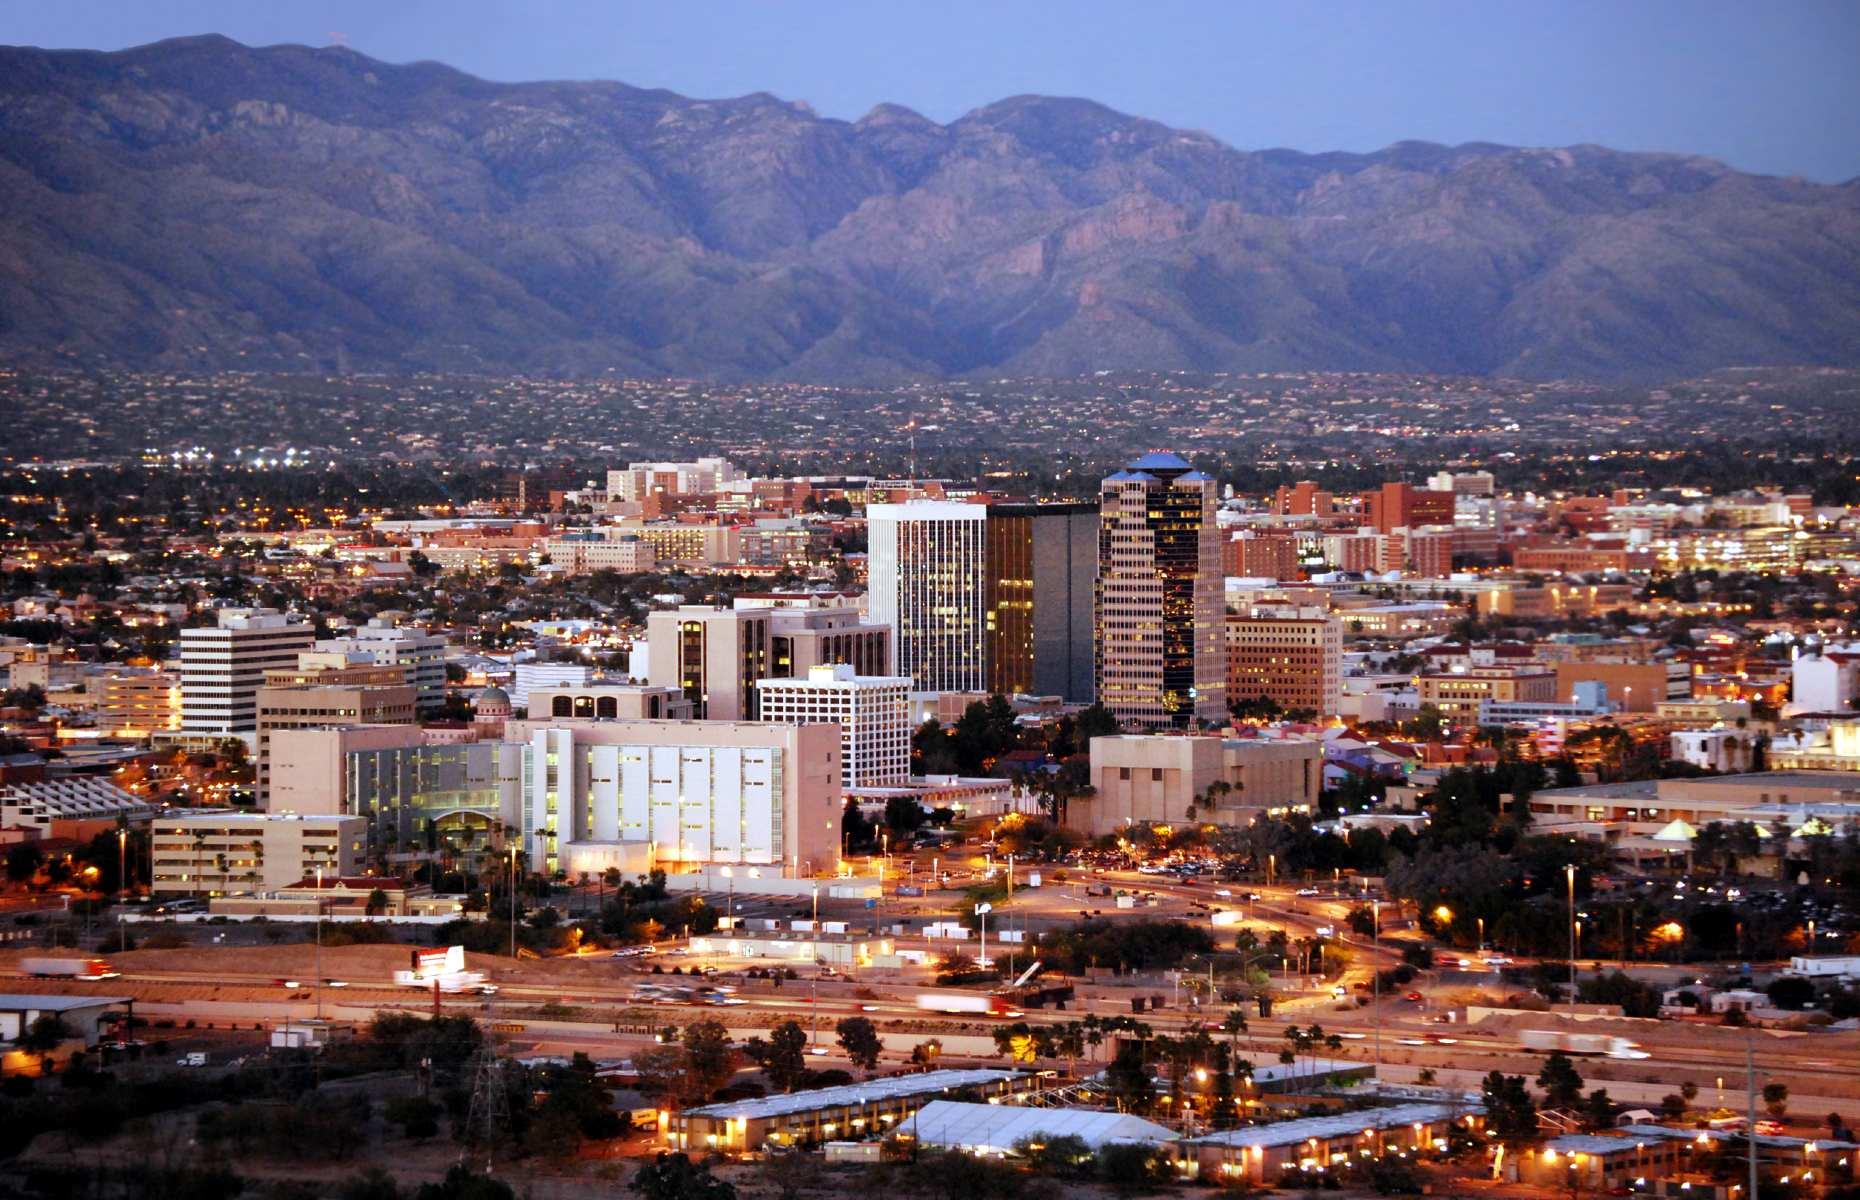 <p>The lively city of Tucson is surrounded by jaw-dropping desert landscapes and enjoys a whopping 350 days of sunshine per year, making it a hot spot (literally) for hiking and sightseeing. But you may be surprised to learn it also has a <a href="https://tucson.cityofgastronomy.org/about#:~:text=On%2015%20December%202015%2C%20Tucson,Creative%20Cities%20Network%20(UCCN).">UNESCO-recognized food scene</a>, thanks to a melting pot of indigenous, Mexican and southwestern influences and a range of trailblazing restaurants. Once you’re full to bursting, stroll through downtown to enjoy a unique mishmash of Spanish and Mexican architecture and colorful adobe houses.</p>  <p><a href="https://www.facebook.com/loveexploringUK?utm_source=msn&utm_medium=social&utm_campaign=front"><strong>Love this? Follow us on Facebook for more travel inspiration</strong></a></p>